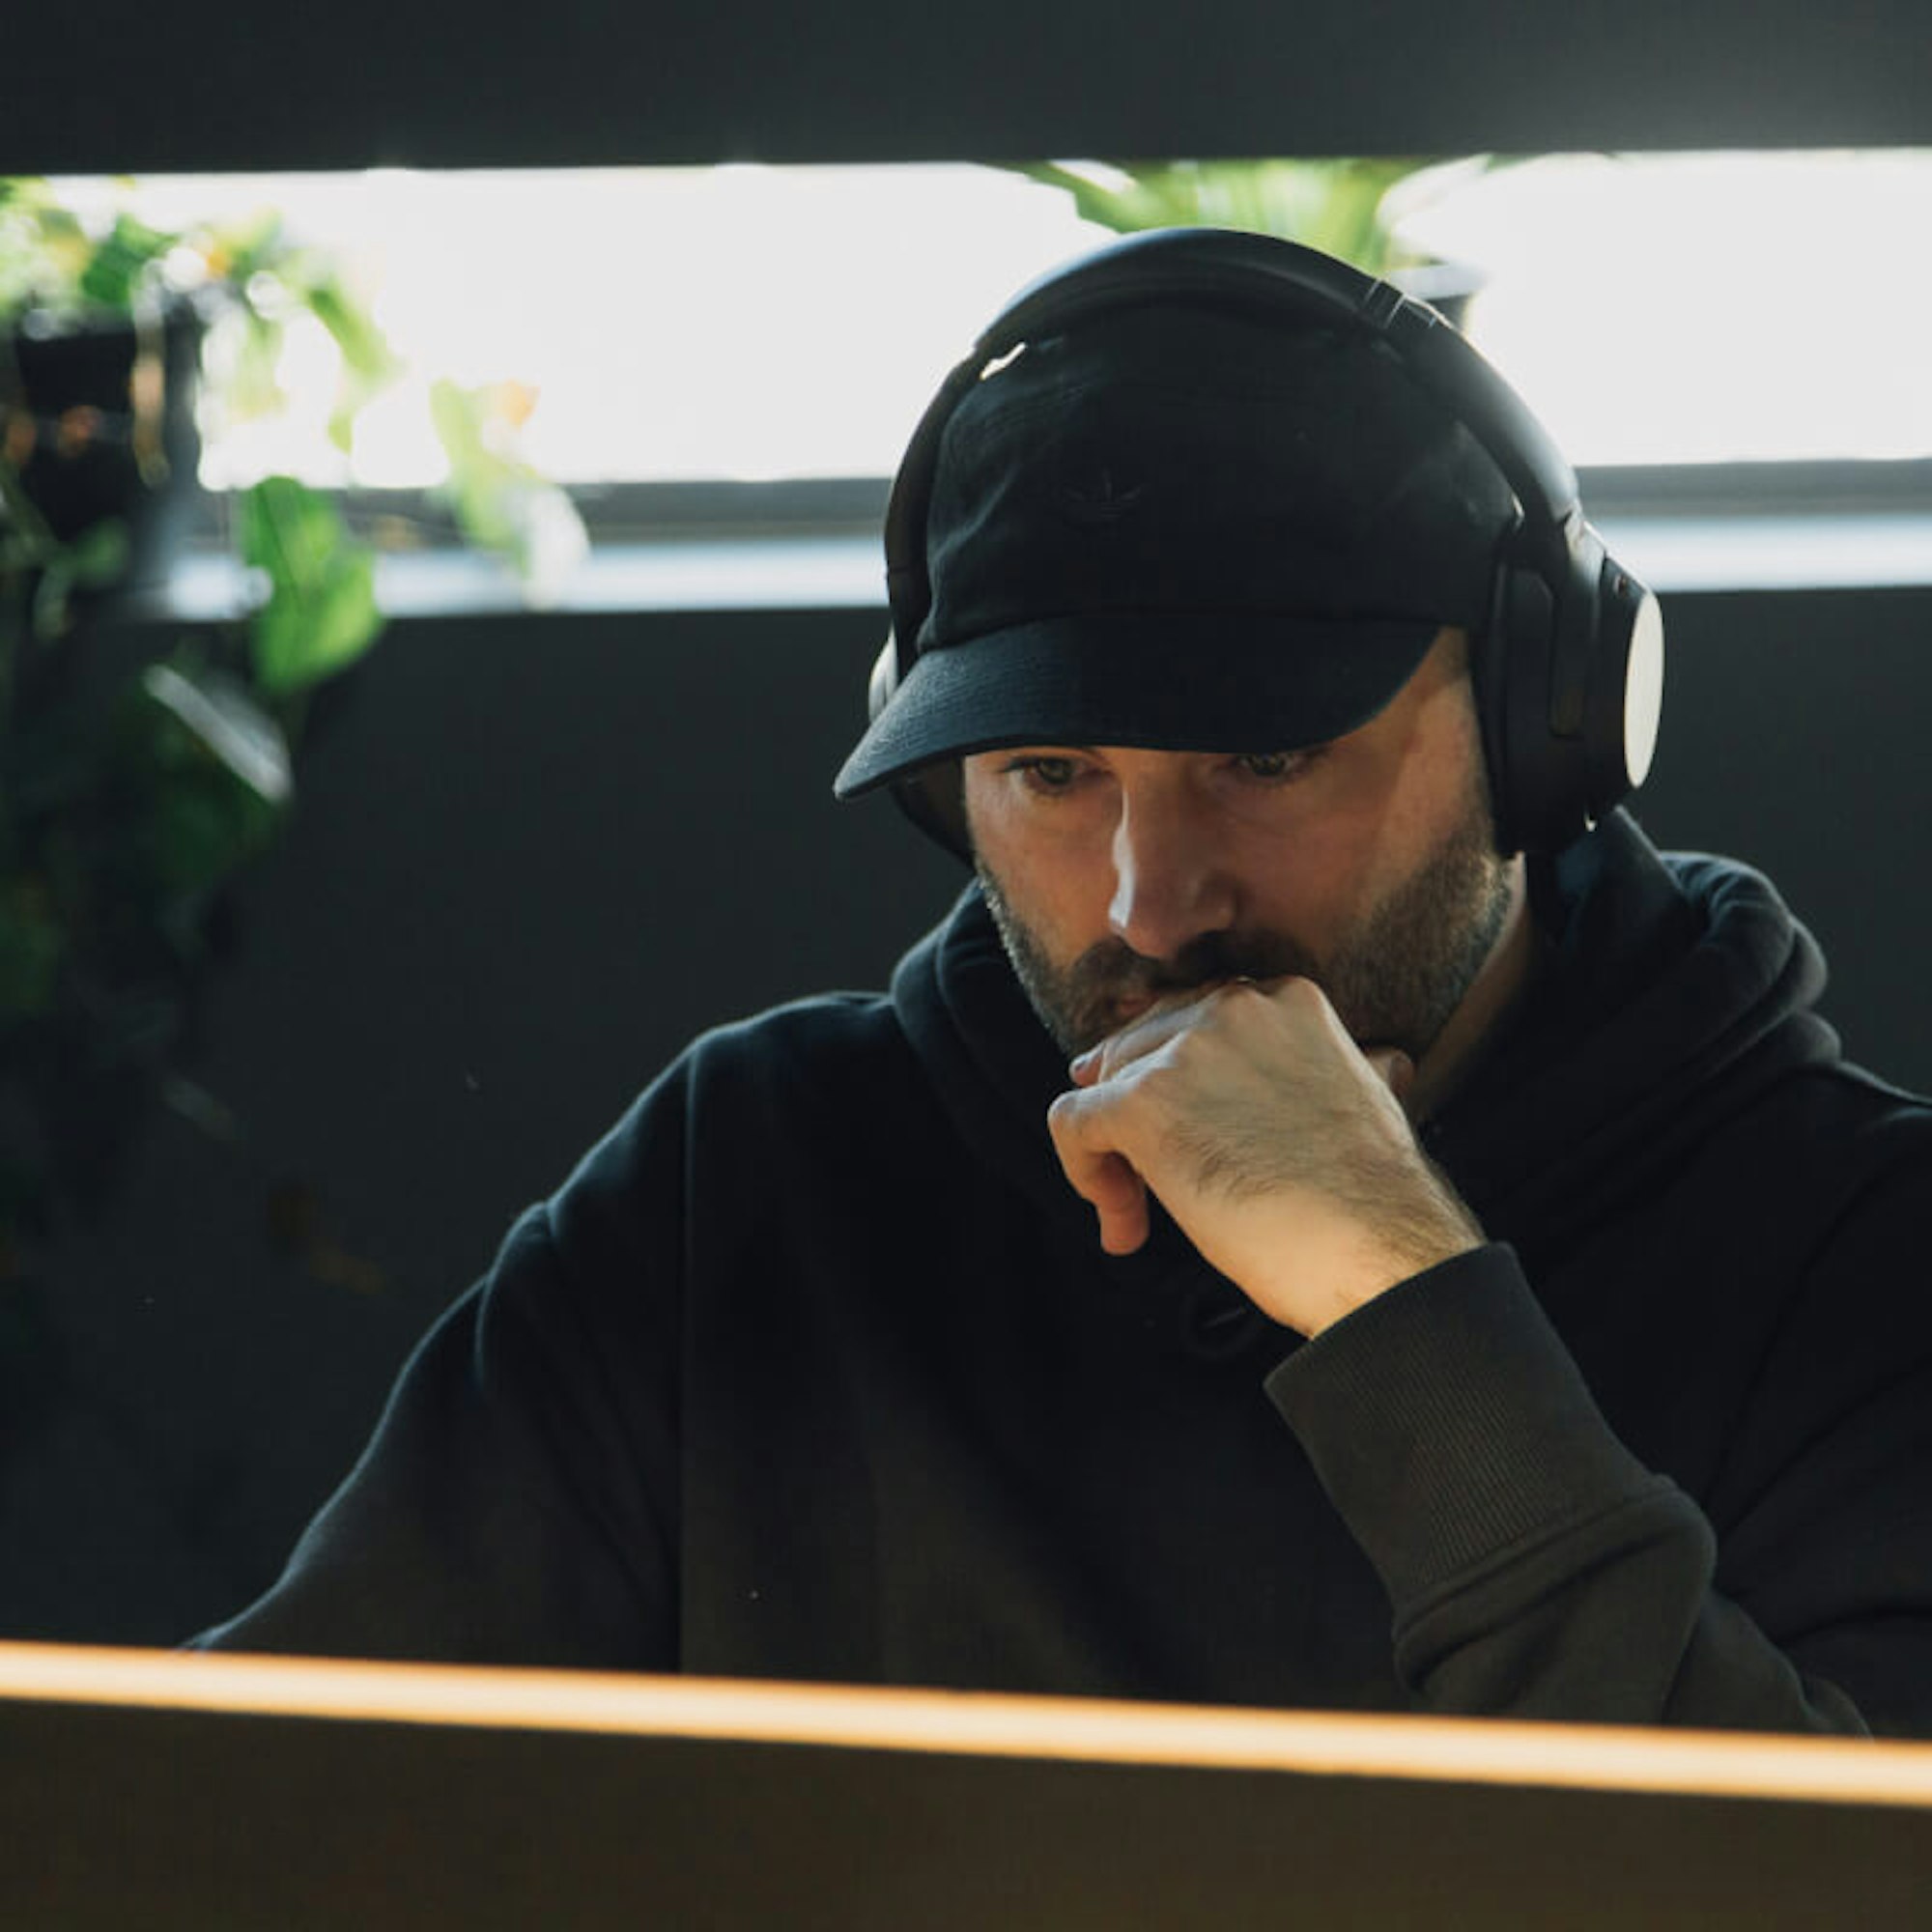 MakeReign team member with a Adidas cap and headphones working at an office with plants and a window in the background